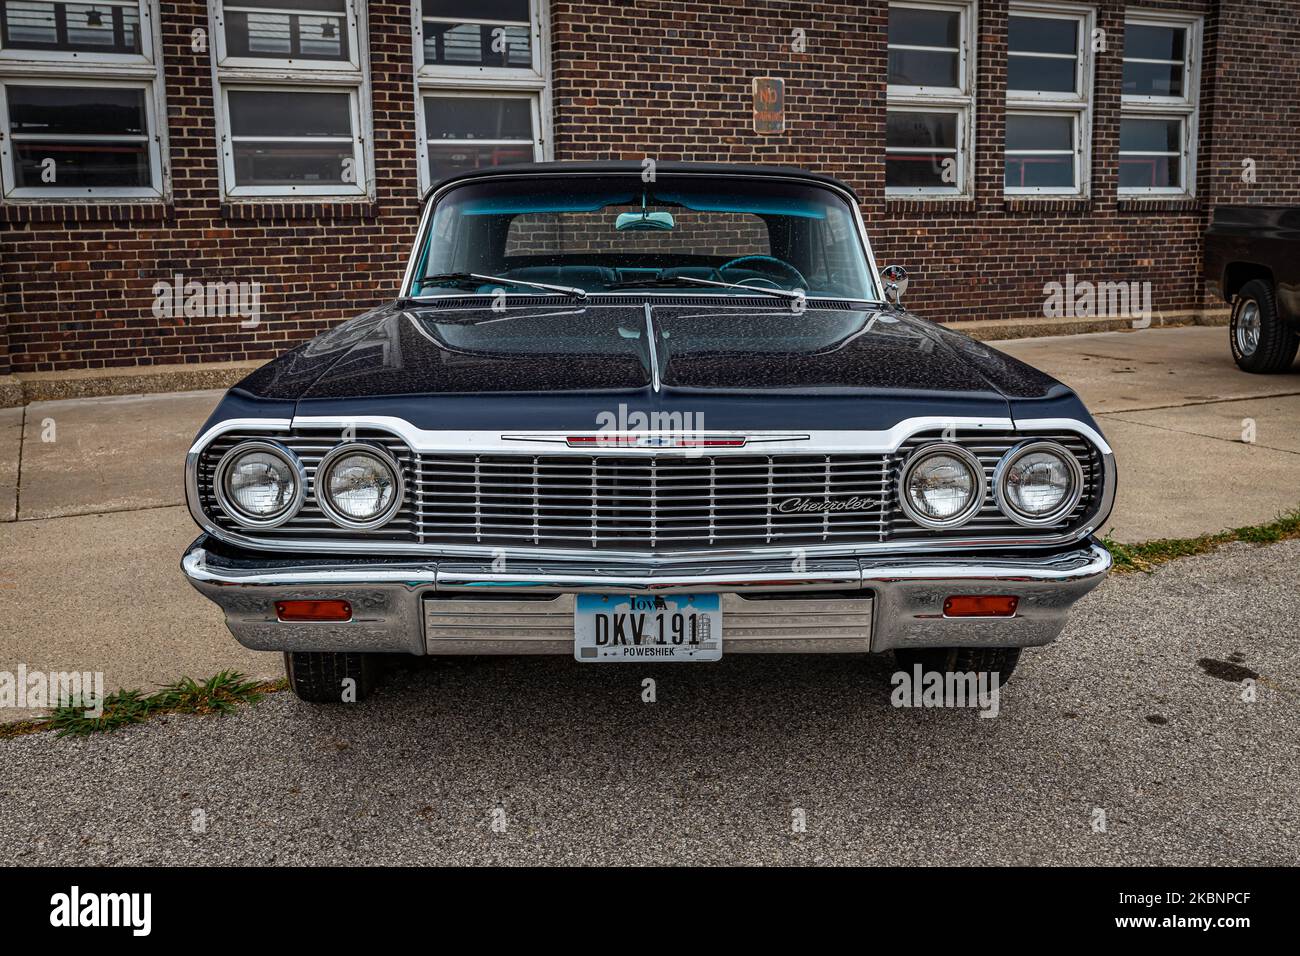 Des Moines, IA - July 01, 2022: High perspective front view of a 1964 Chevrolet Impala Convertible at a local car show. Stock Photo